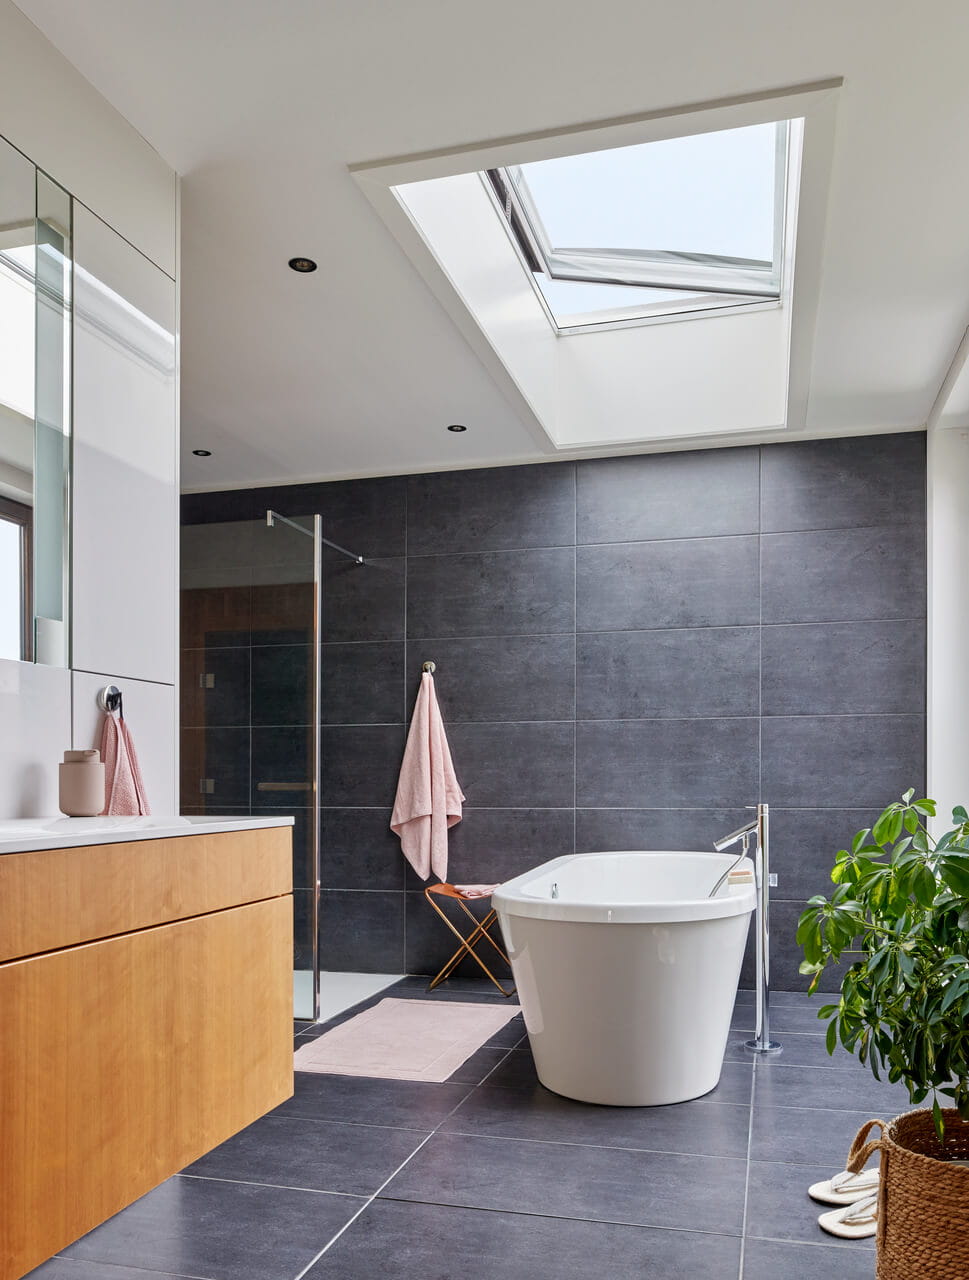 Bathroom with a opened flat roof window above the bathtub.